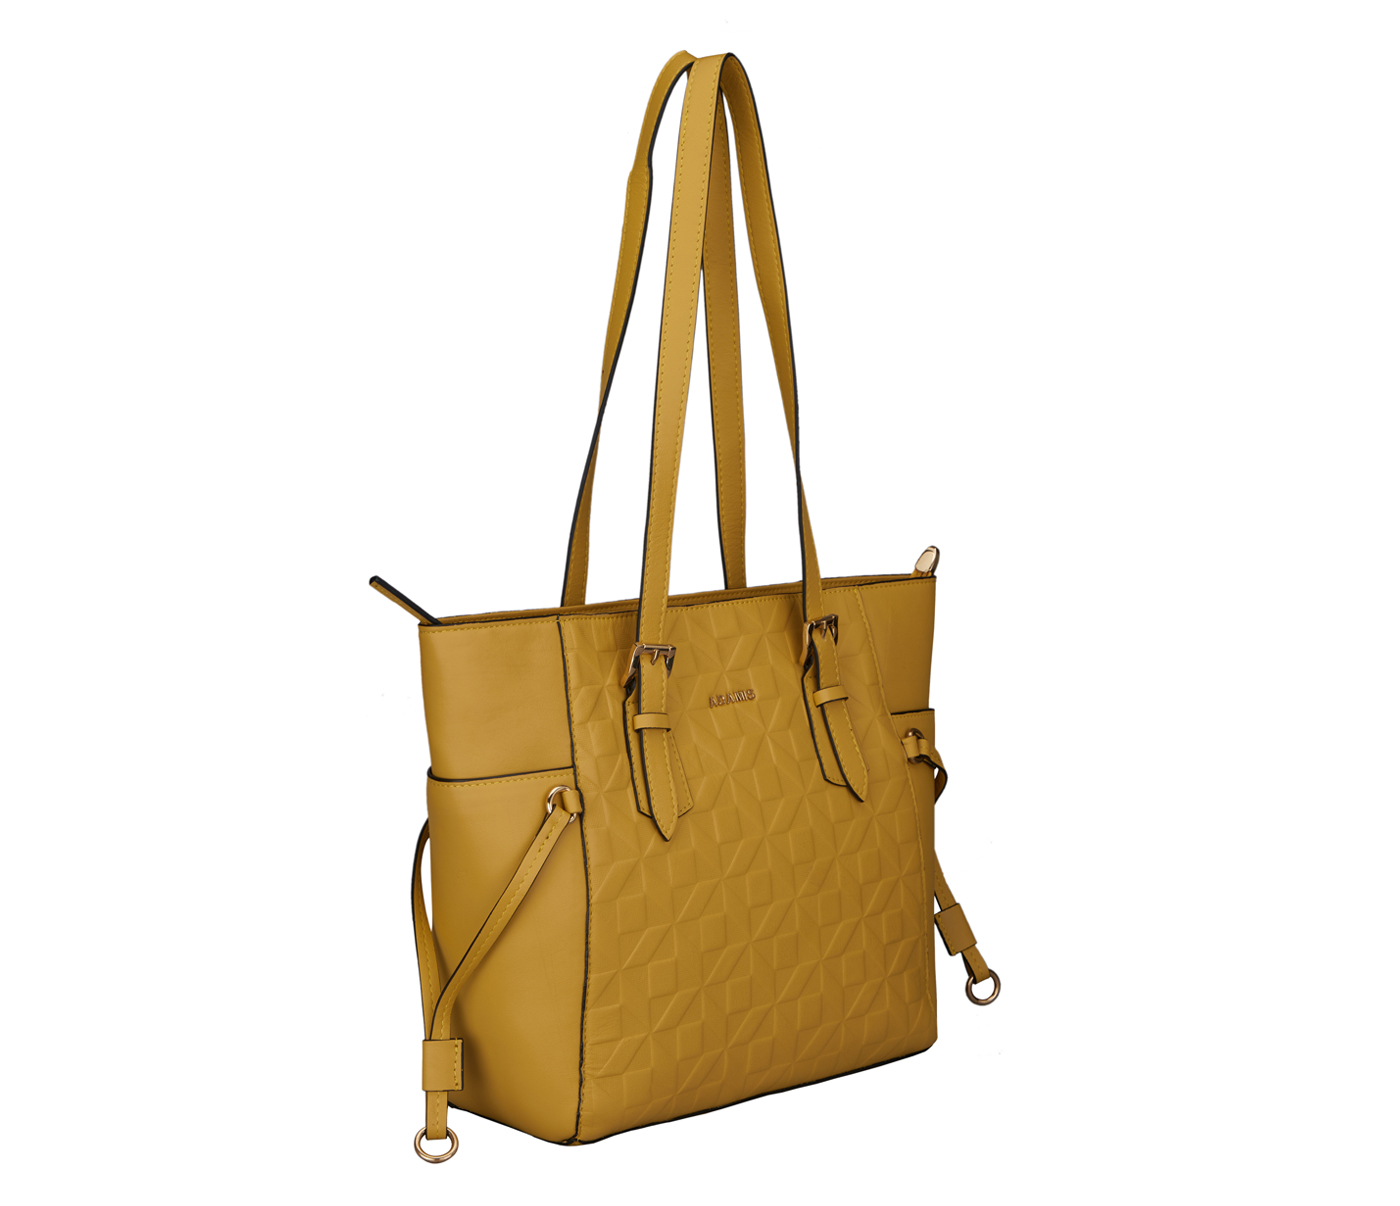 B899-Abril-Shoulder work bag in Genuine Leather - Yellow